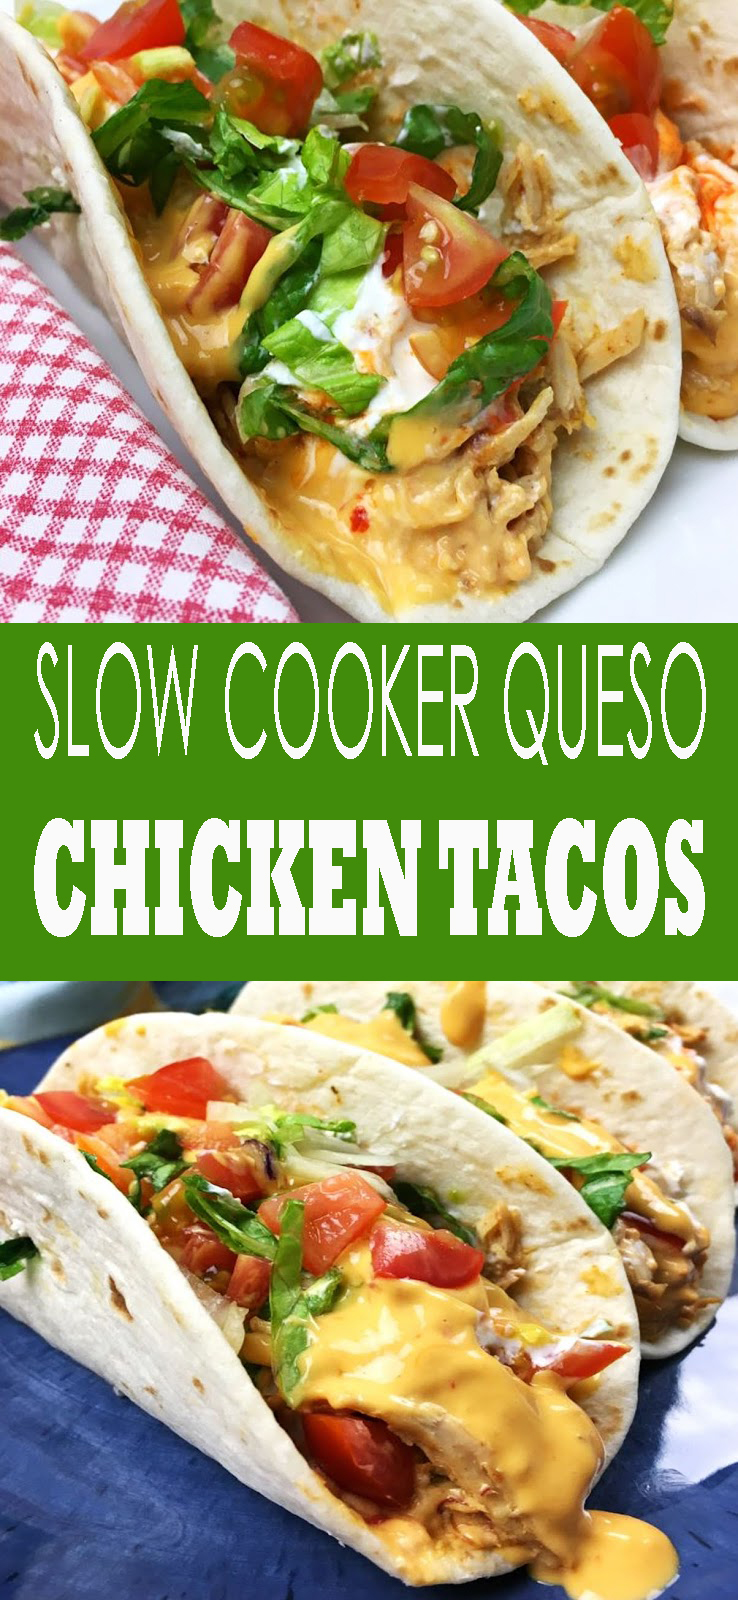 SLOW COOKER QUESO CHICKEN TACOS - pinsgreatrecipes